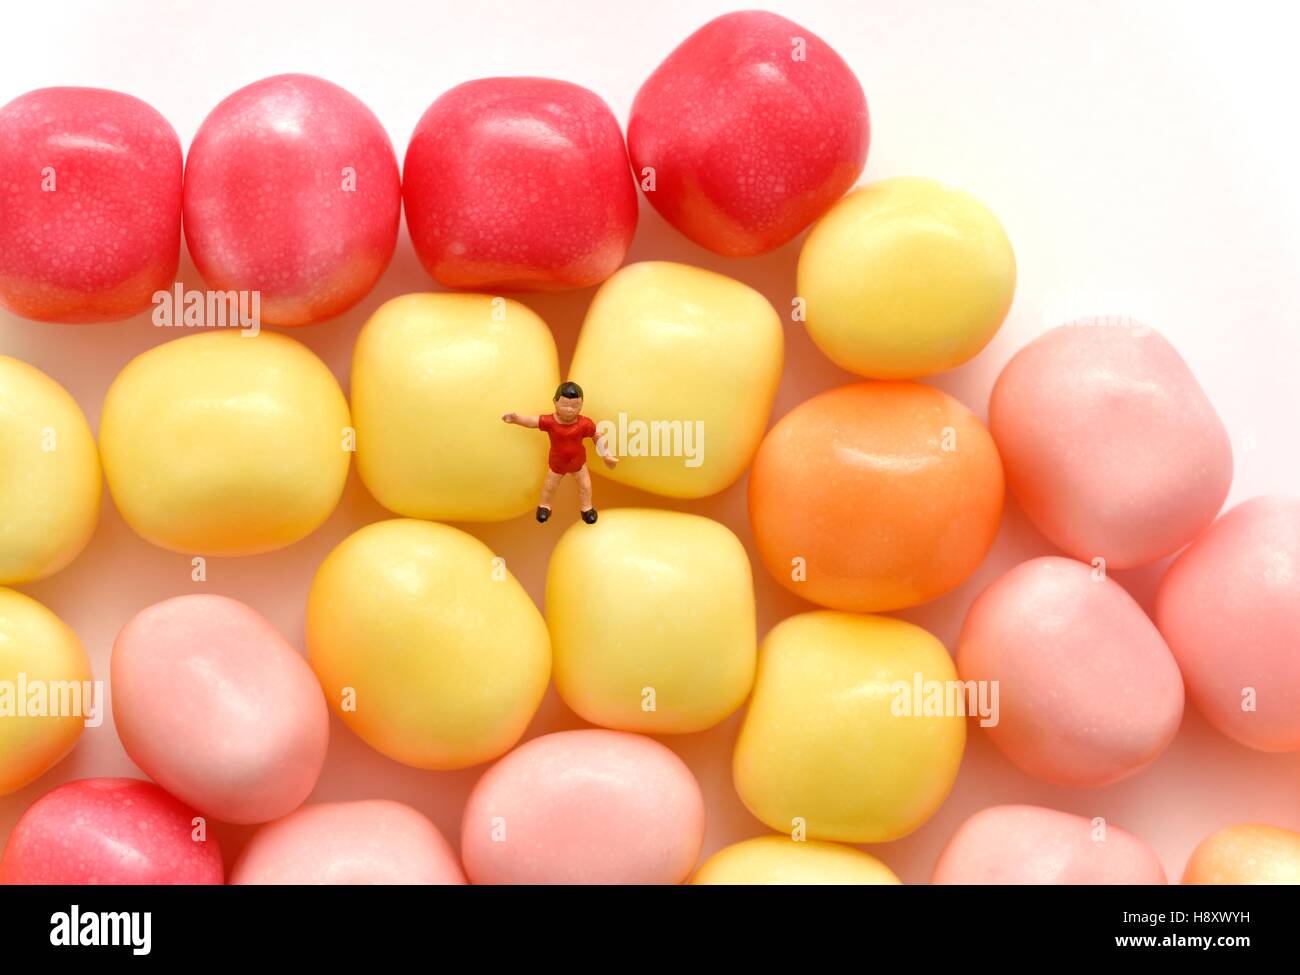 Miniature figurine young boy standing on some candy sweets Stock Photo